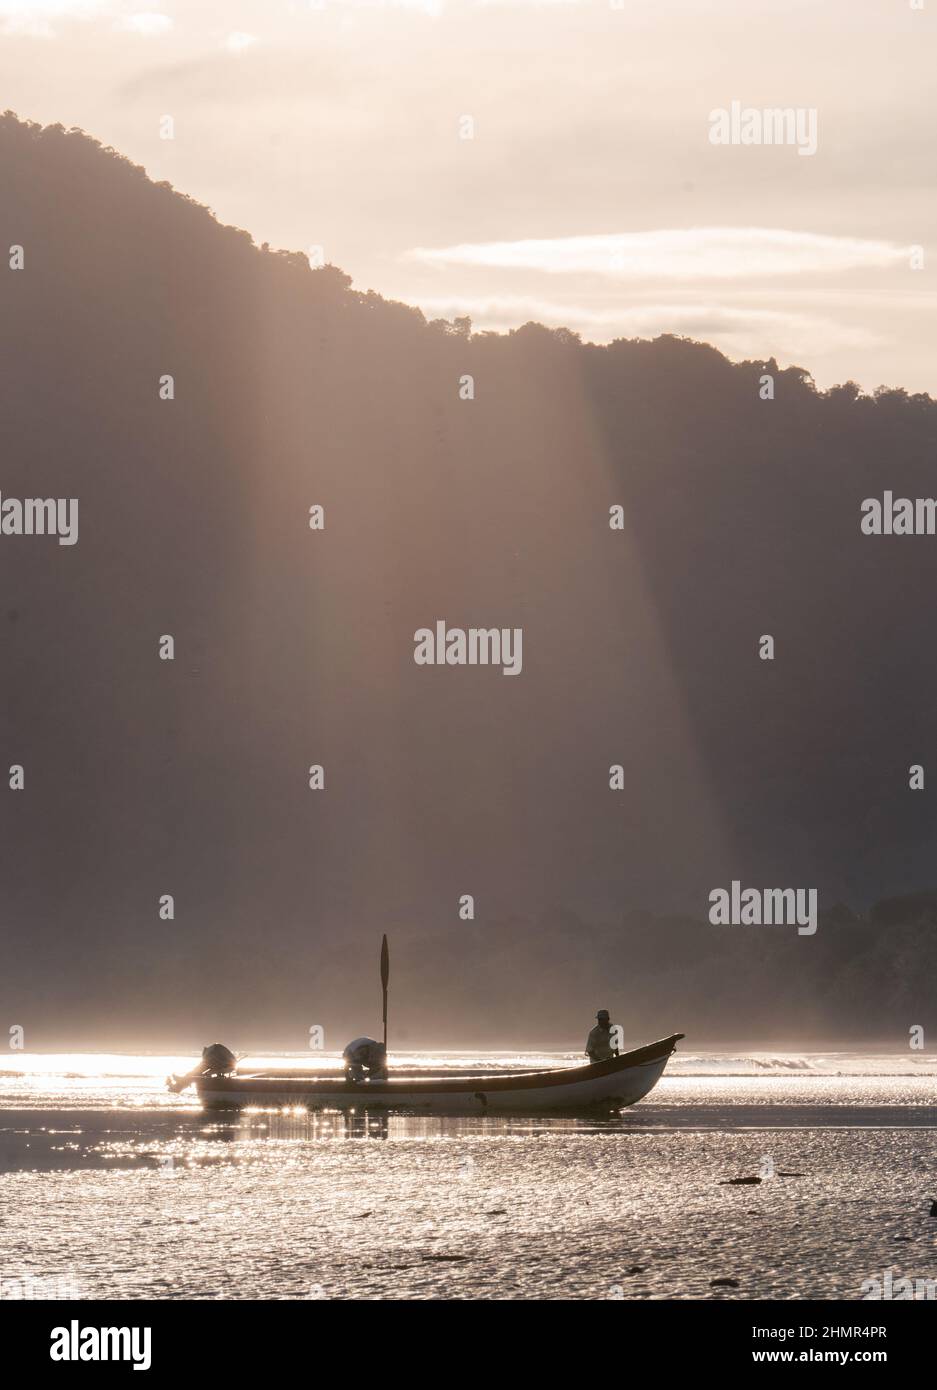 Fishermen sail on the coasts of Coqui at the Choco region in Colombia early in the morning in Coqui - Choco, Colombia on July 6, 2021. Stock Photo